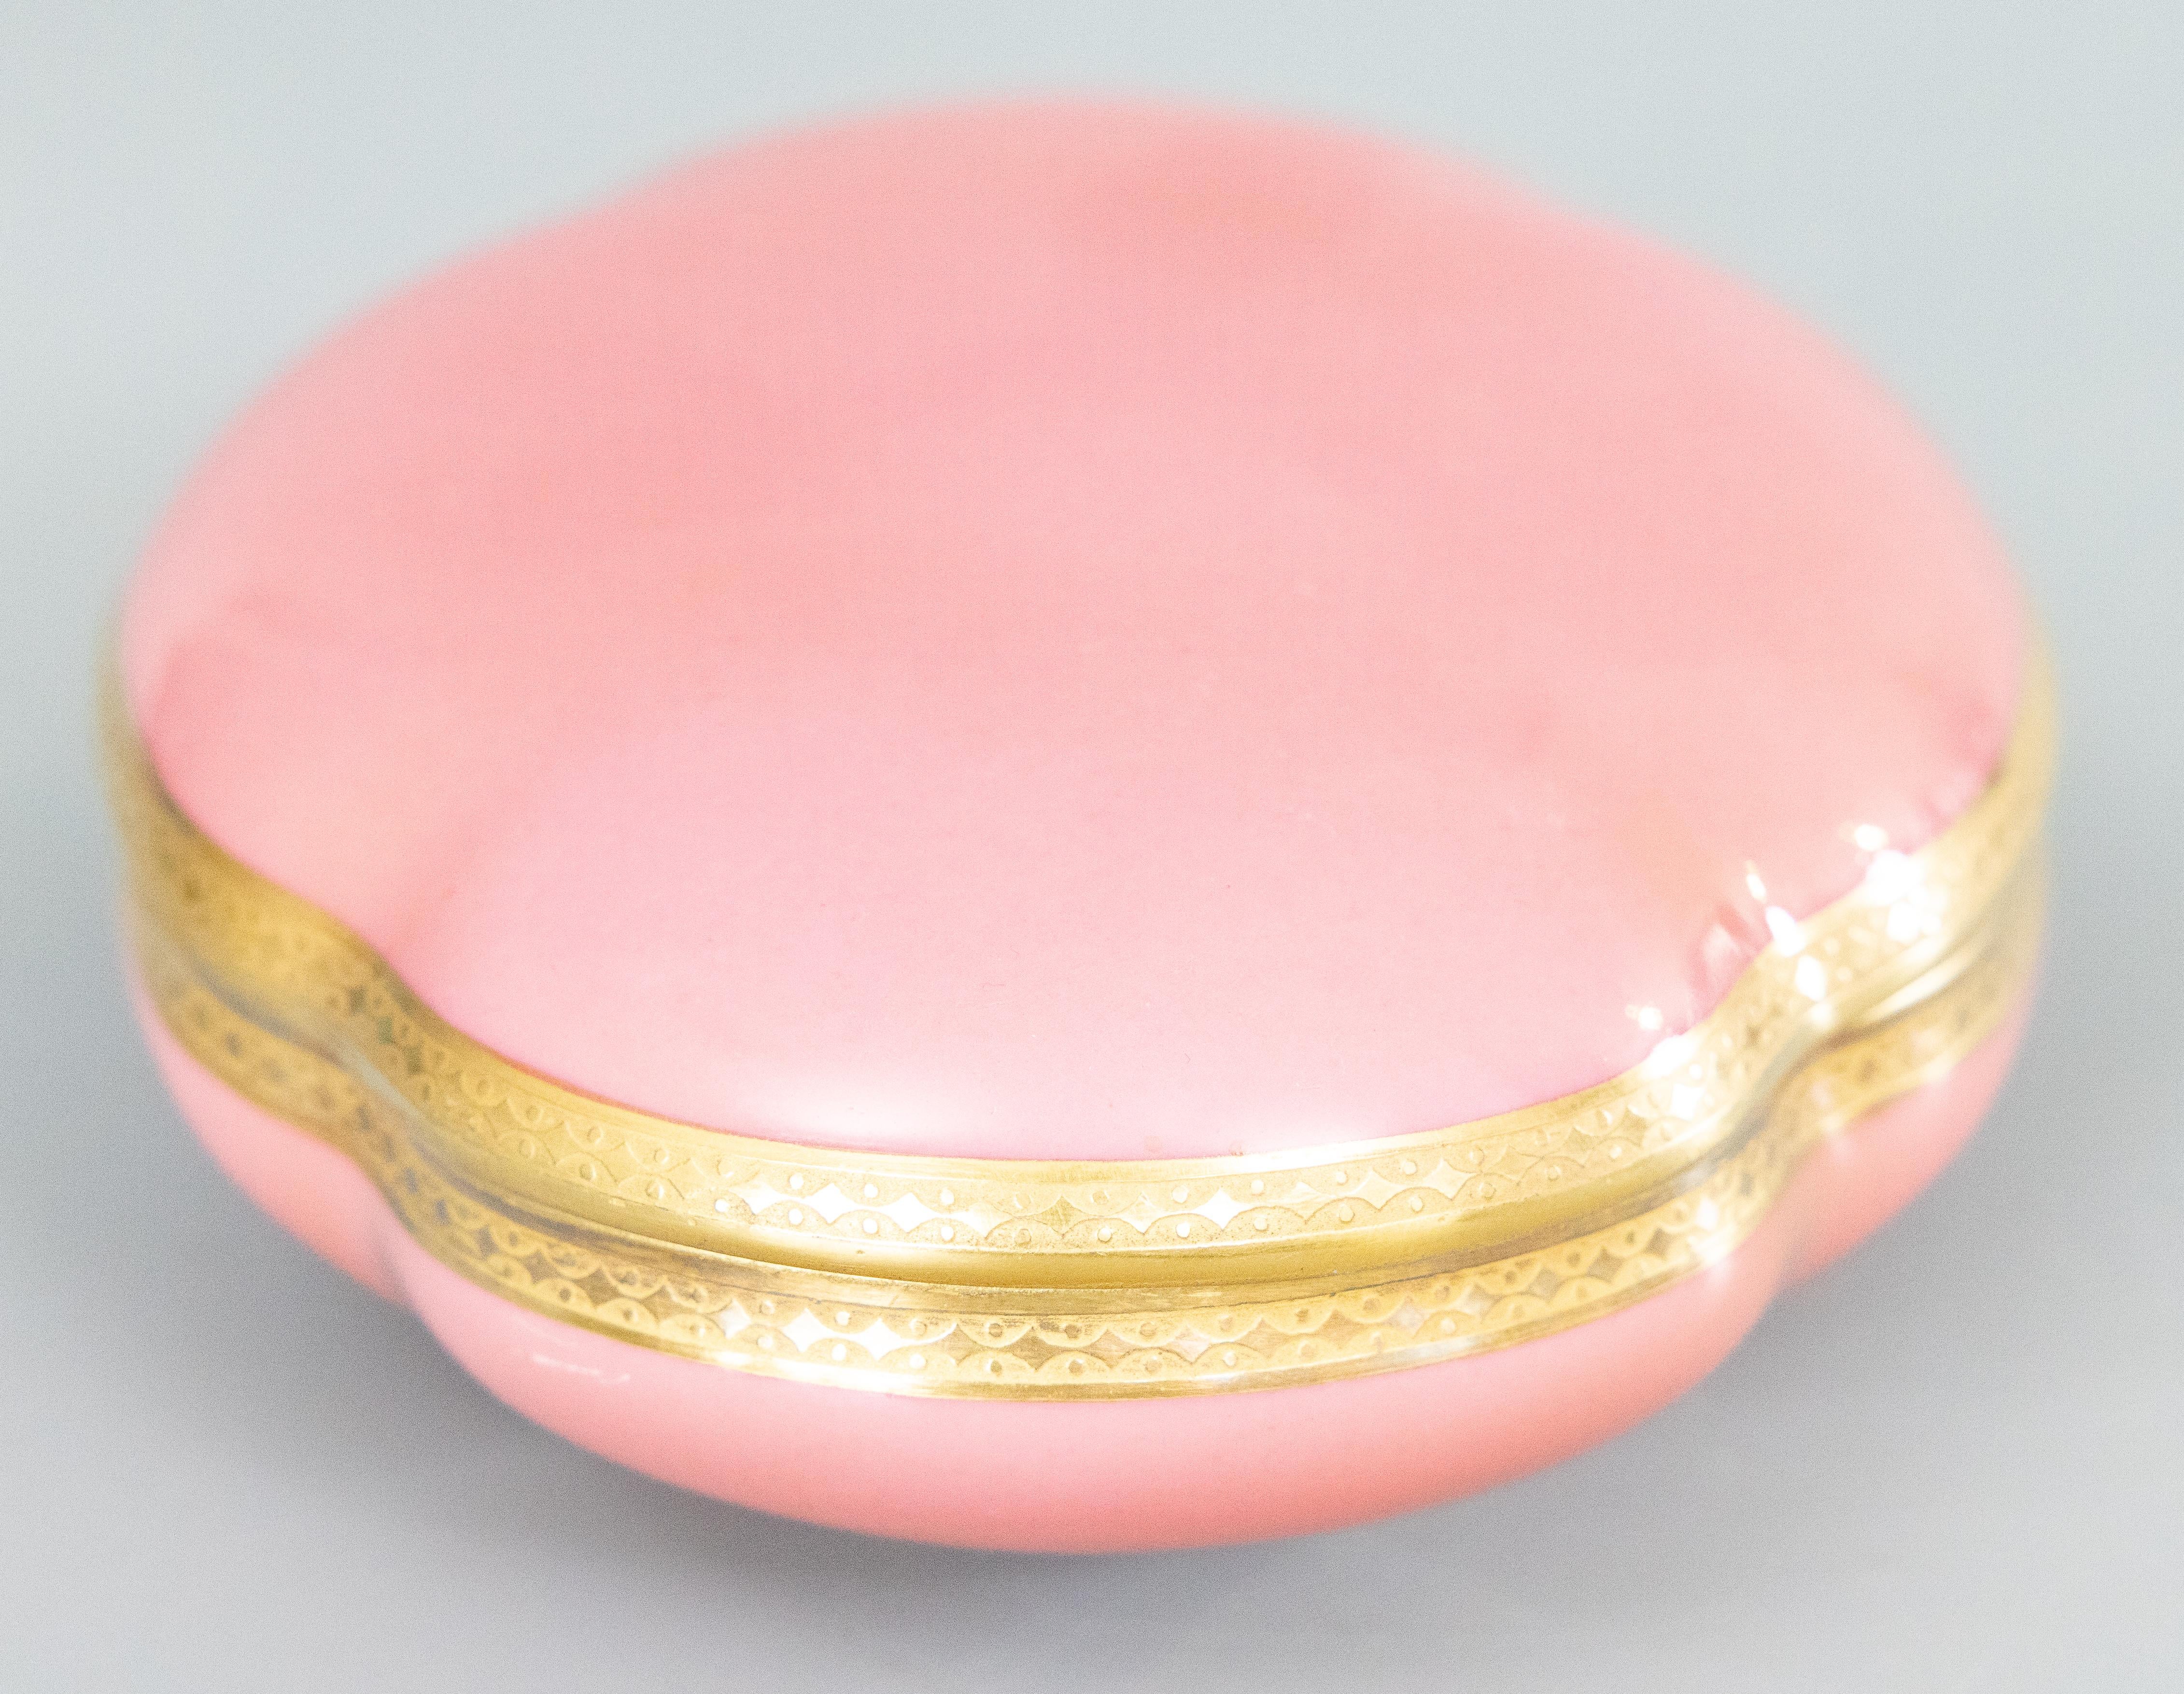 A stunning antique French pink porcelain lidded jewelry box by Theodore Haviland, Limoges, France, circa 1900-1920. Maker's mark on reverse. This gorgeous box has a stylish serpentine design in a lovely shade of pink with gilt accents. It displays